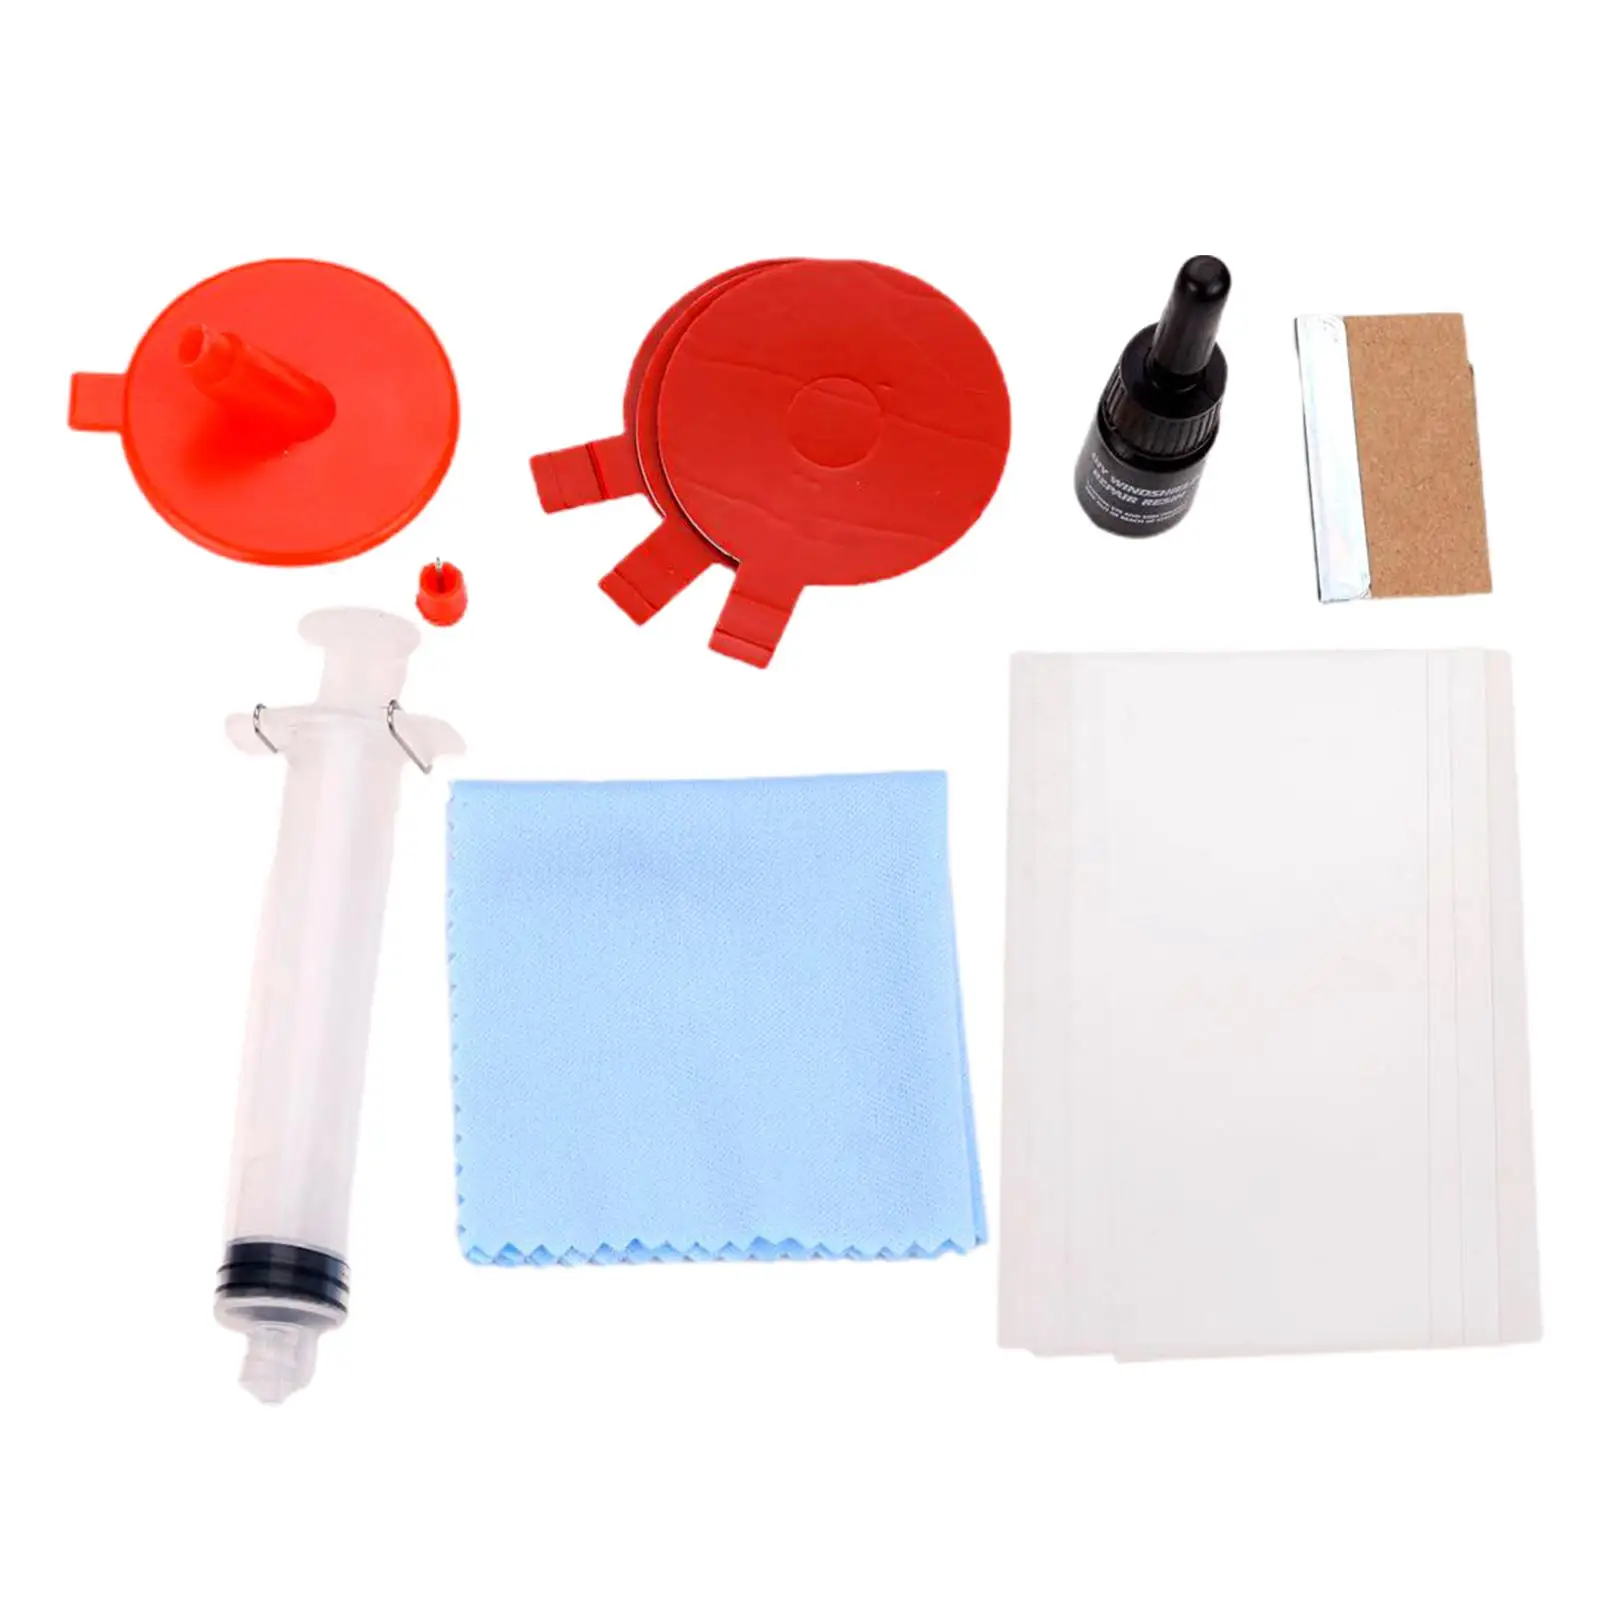 Automotive Windshield Repair Kit Remover kit for Fixing Chips Long Line Crack